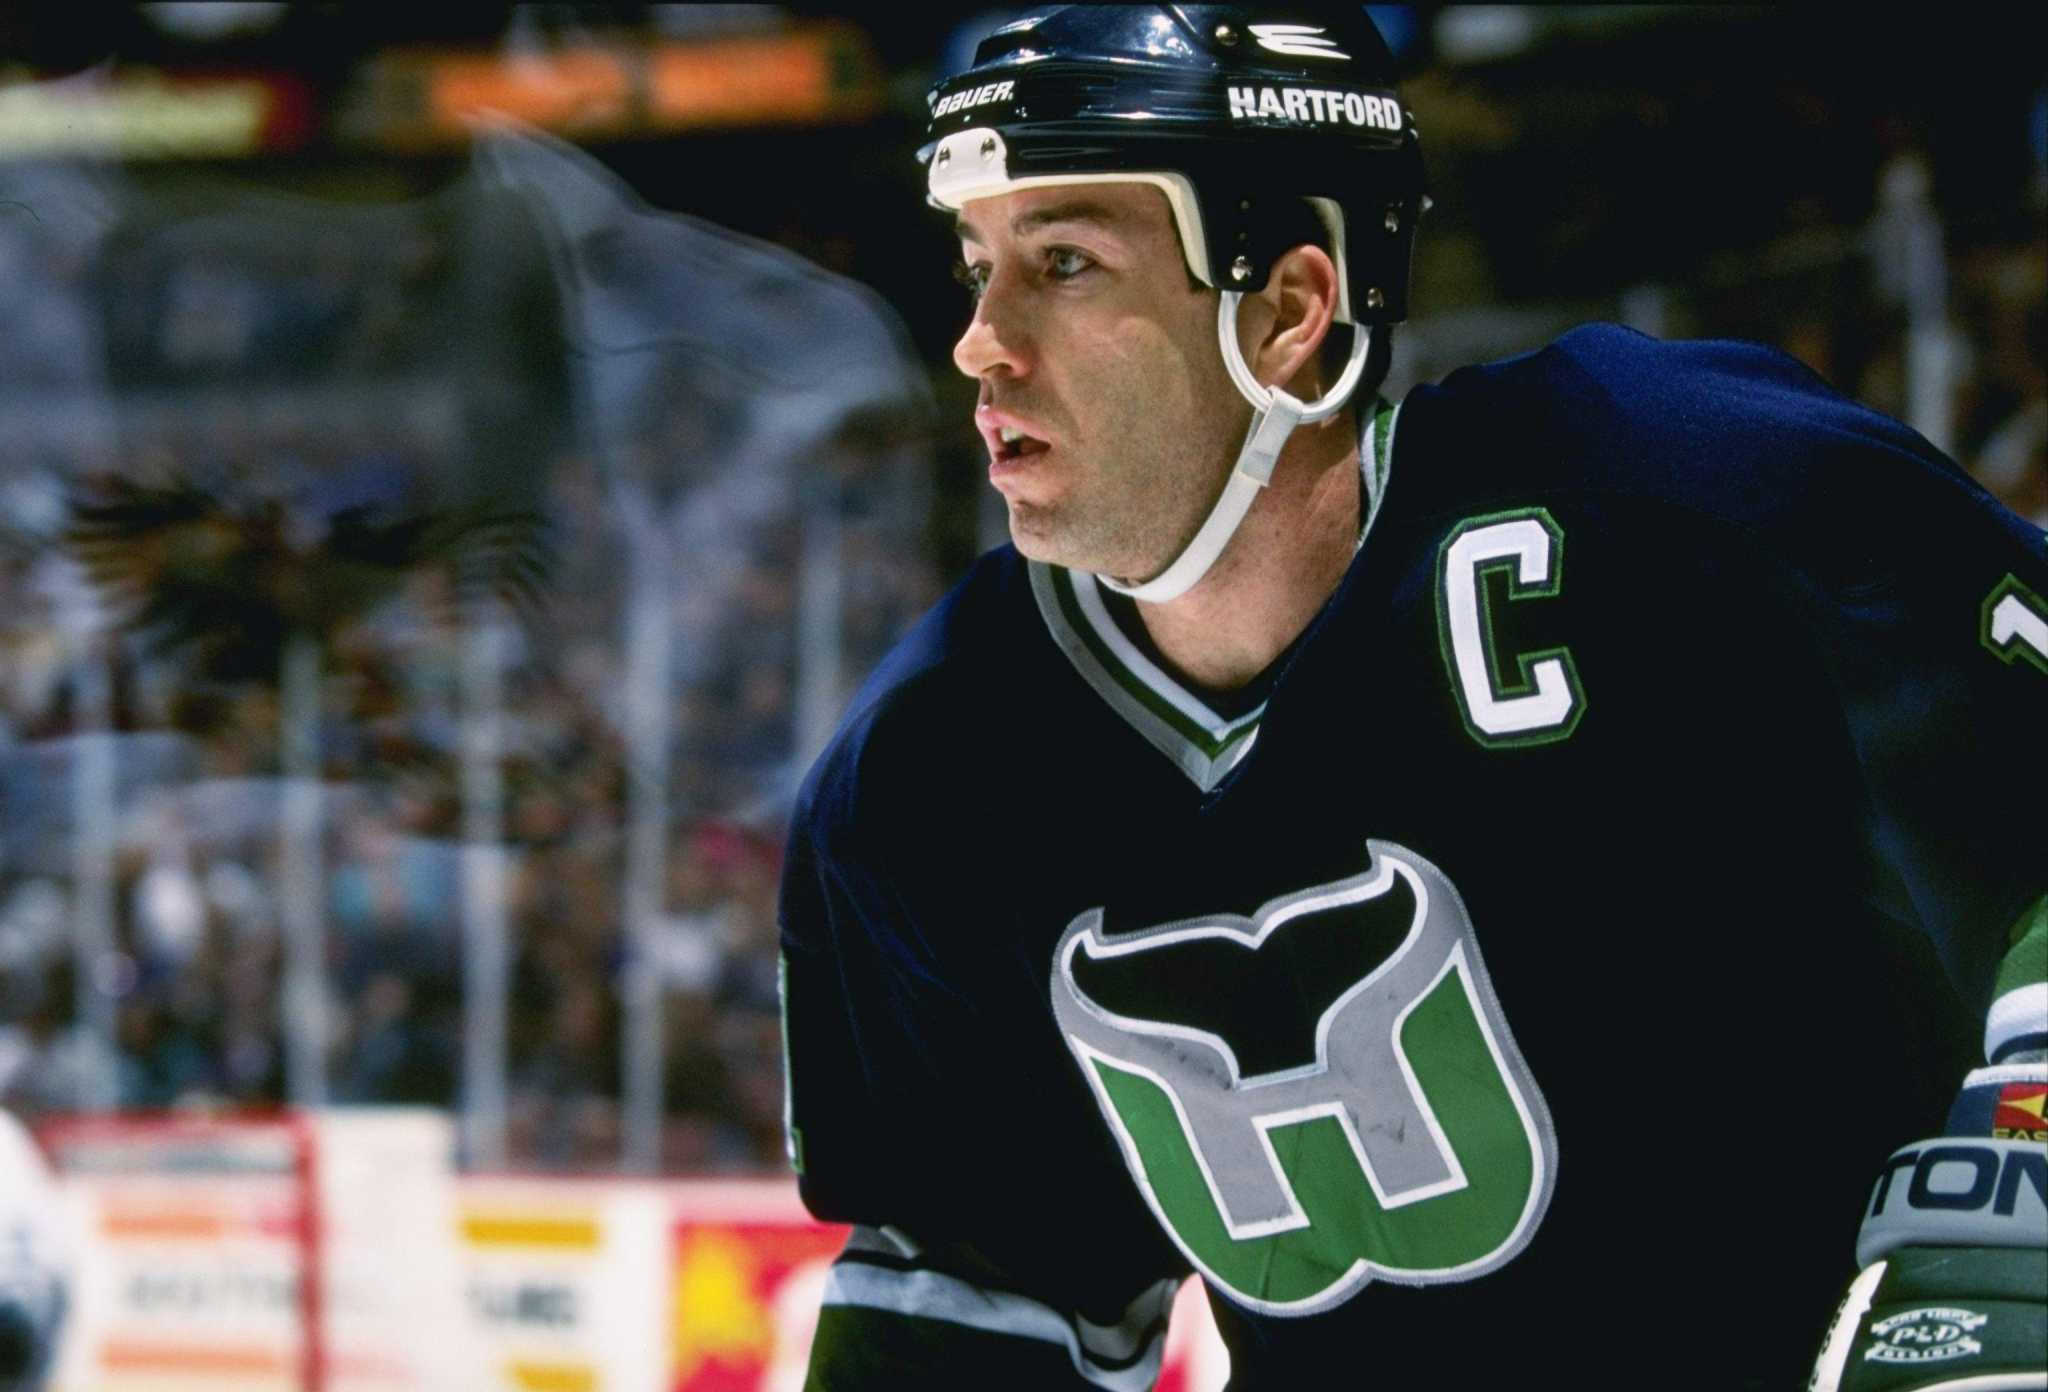 Artist Peter Good, who created Hartford Whalers' logo, has died